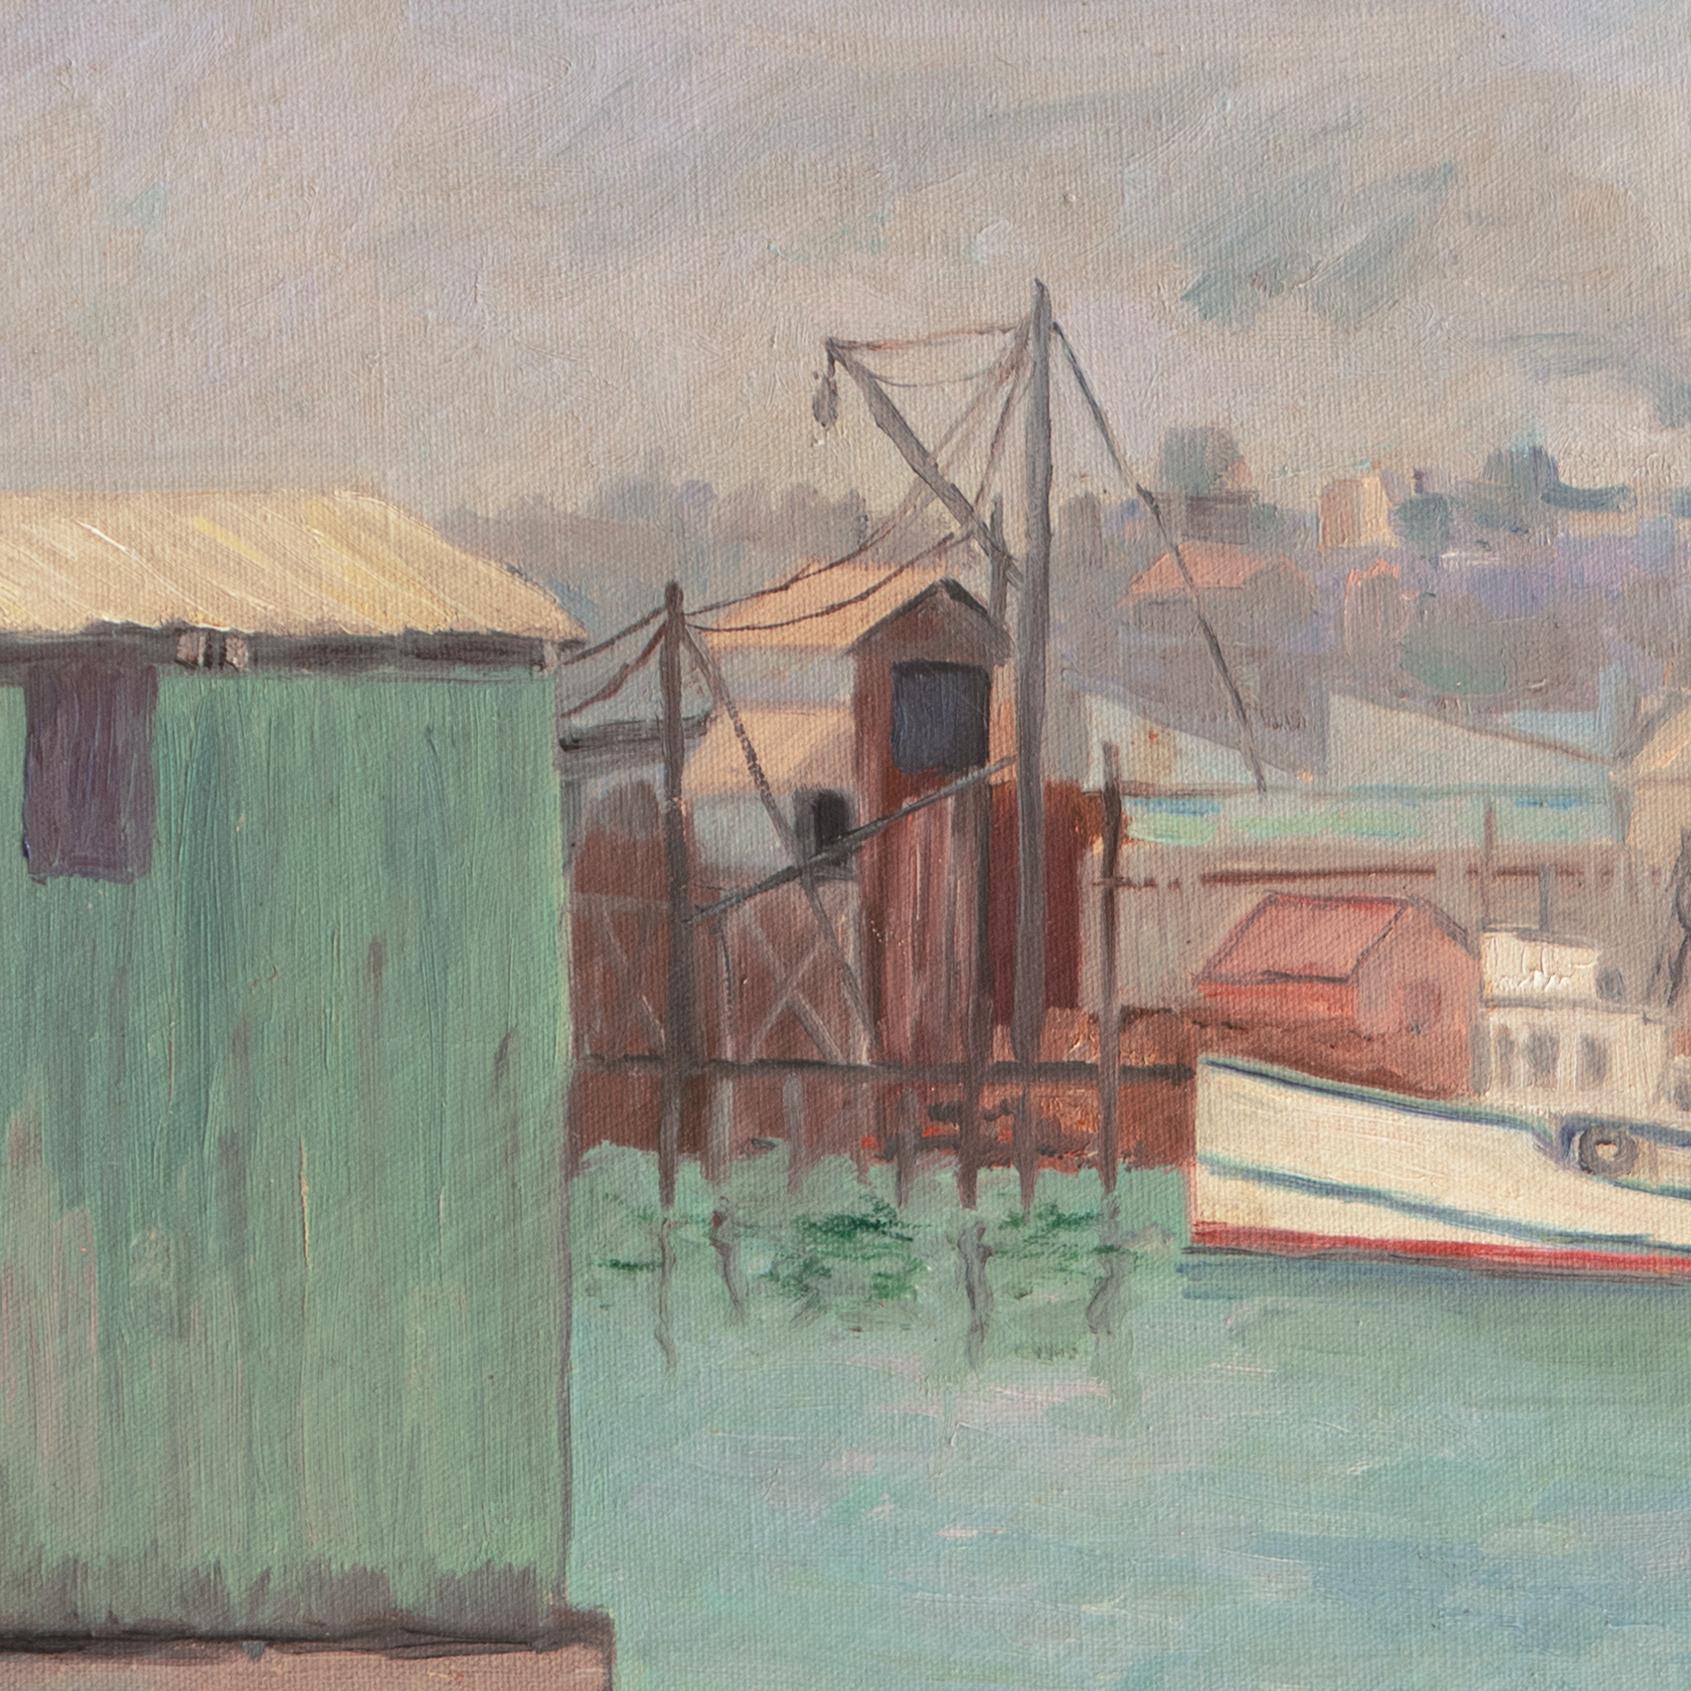 Signed lower left, 'H. Williams' for Henrietta W. Williams (American, 19-20th Century) and painted circa 1950; additionally accompanied by old San Diego Art Guild Exhibition label verso bearing artist's name, address and title 'Fisherman's Shack'.